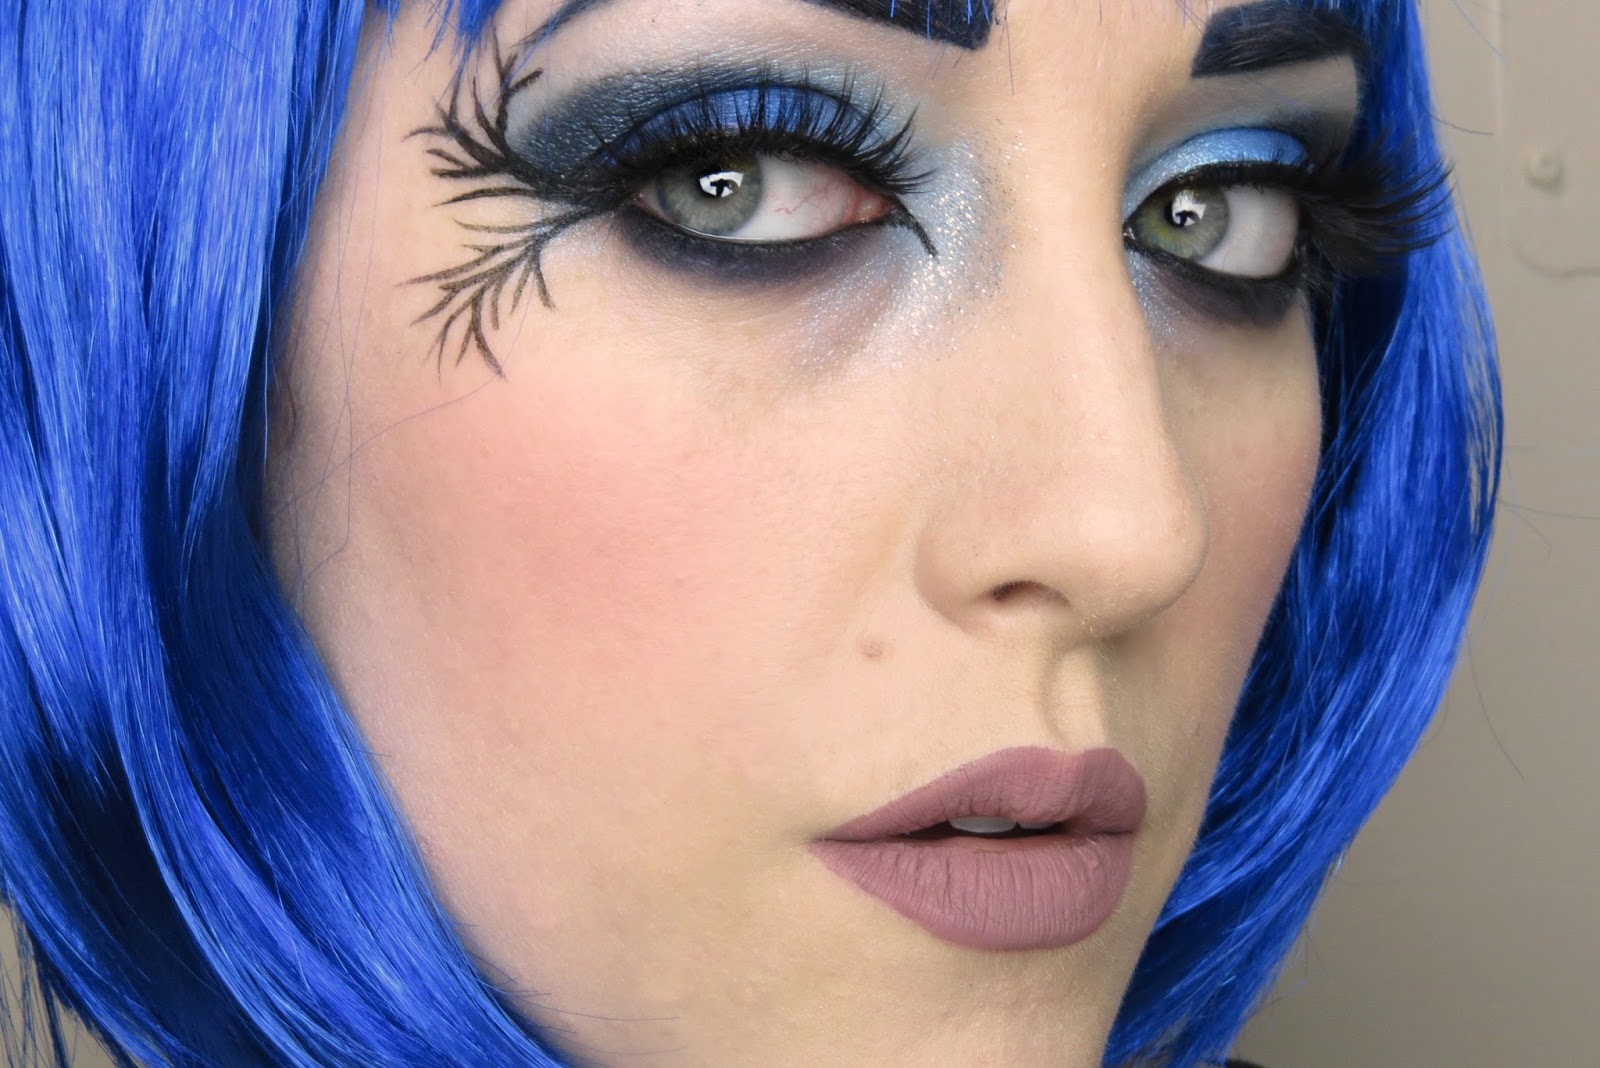 7. "Halloween Makeup: Blue Hair and Fairy" - wide 3